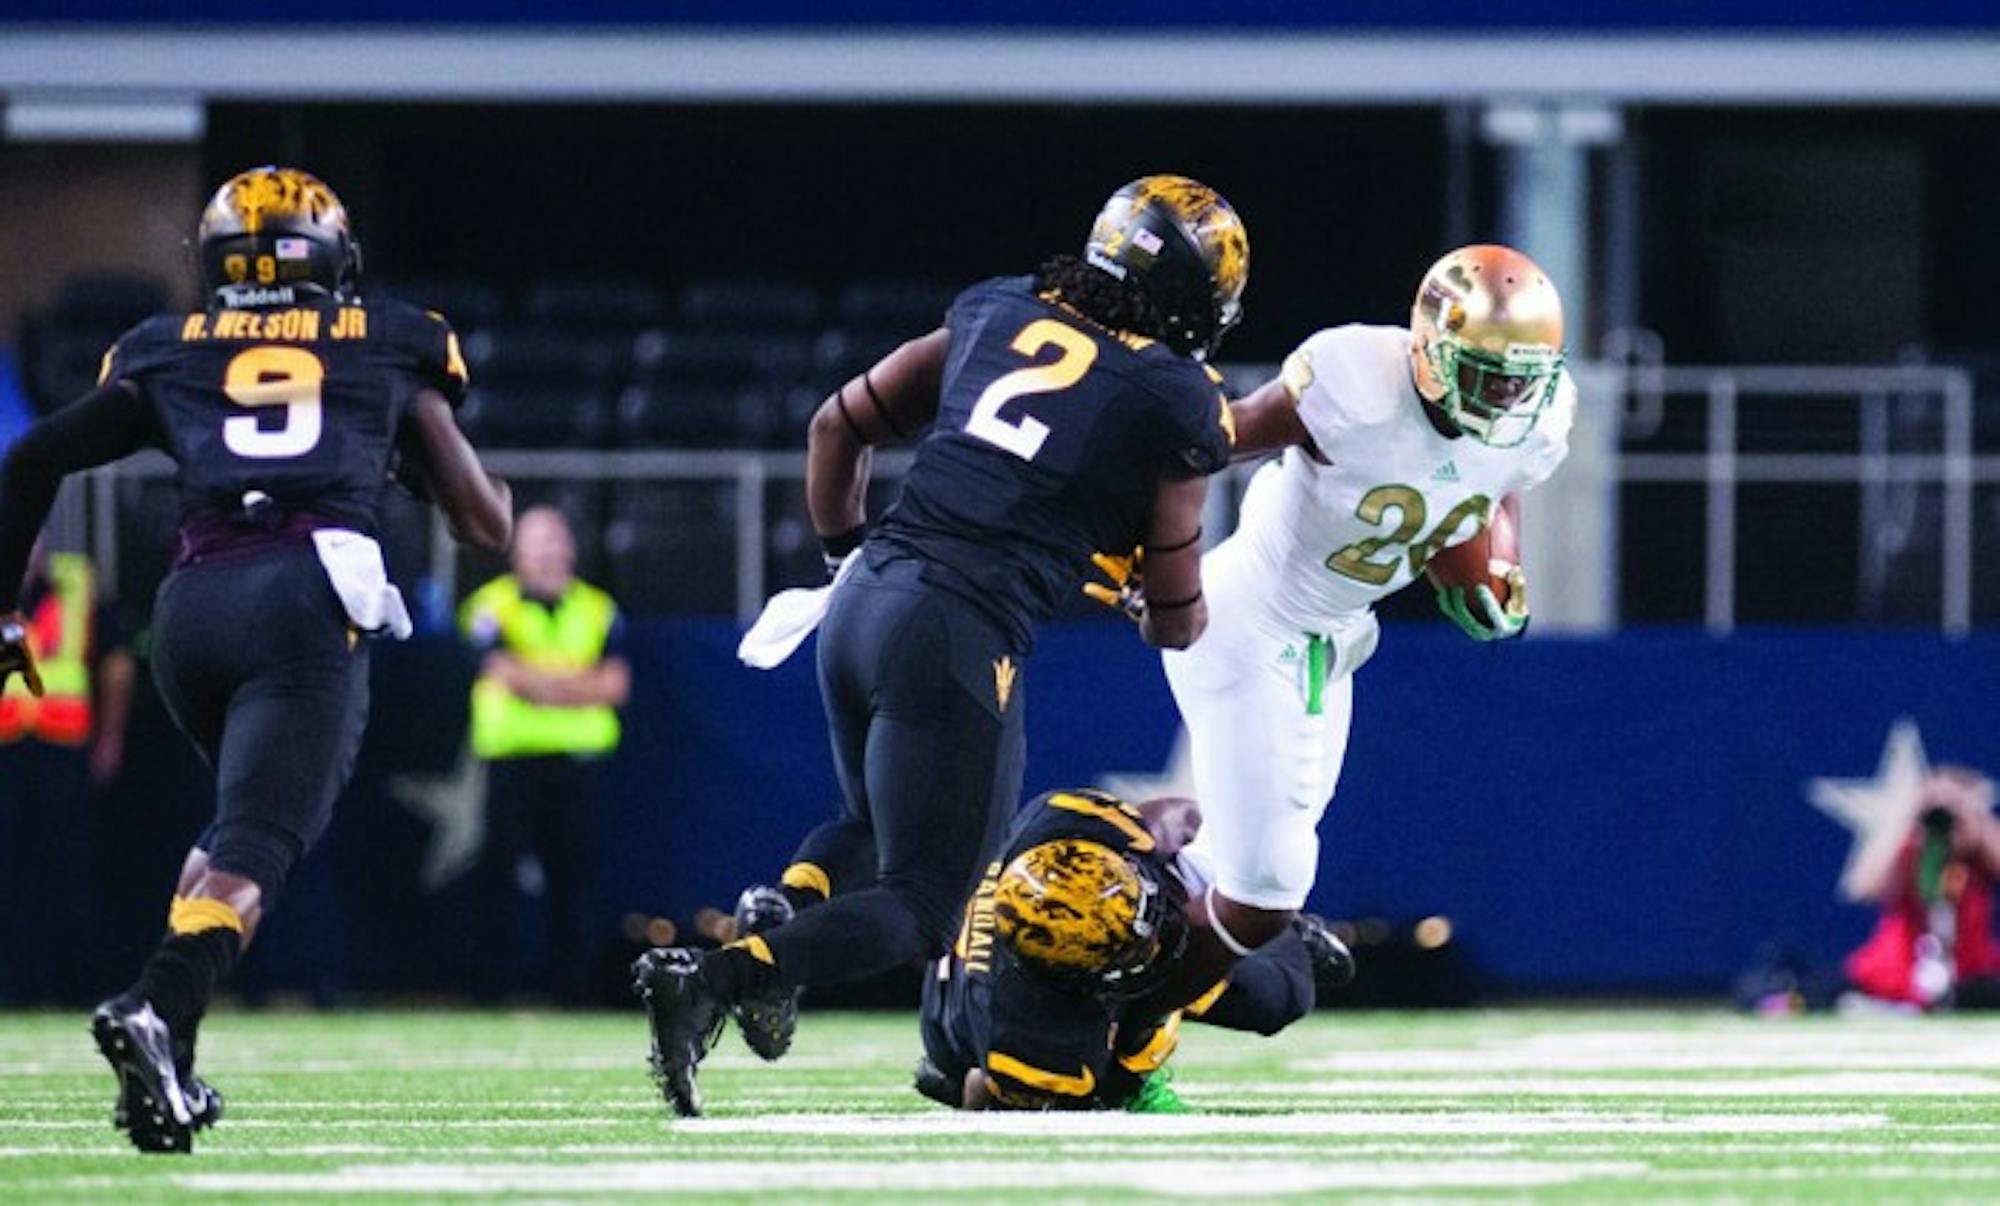 Irish senior running back C.J. Prosise tries to break an Arizona State tackle during Notre Dame’s 37-34 win over the Sun Devils on Oct. 5, 2013. The game, part of Notre Dame’s annual Shamrock Series, took place at AT&T Stadium in Arlington, Texas, home of the Dallas Cowboys.